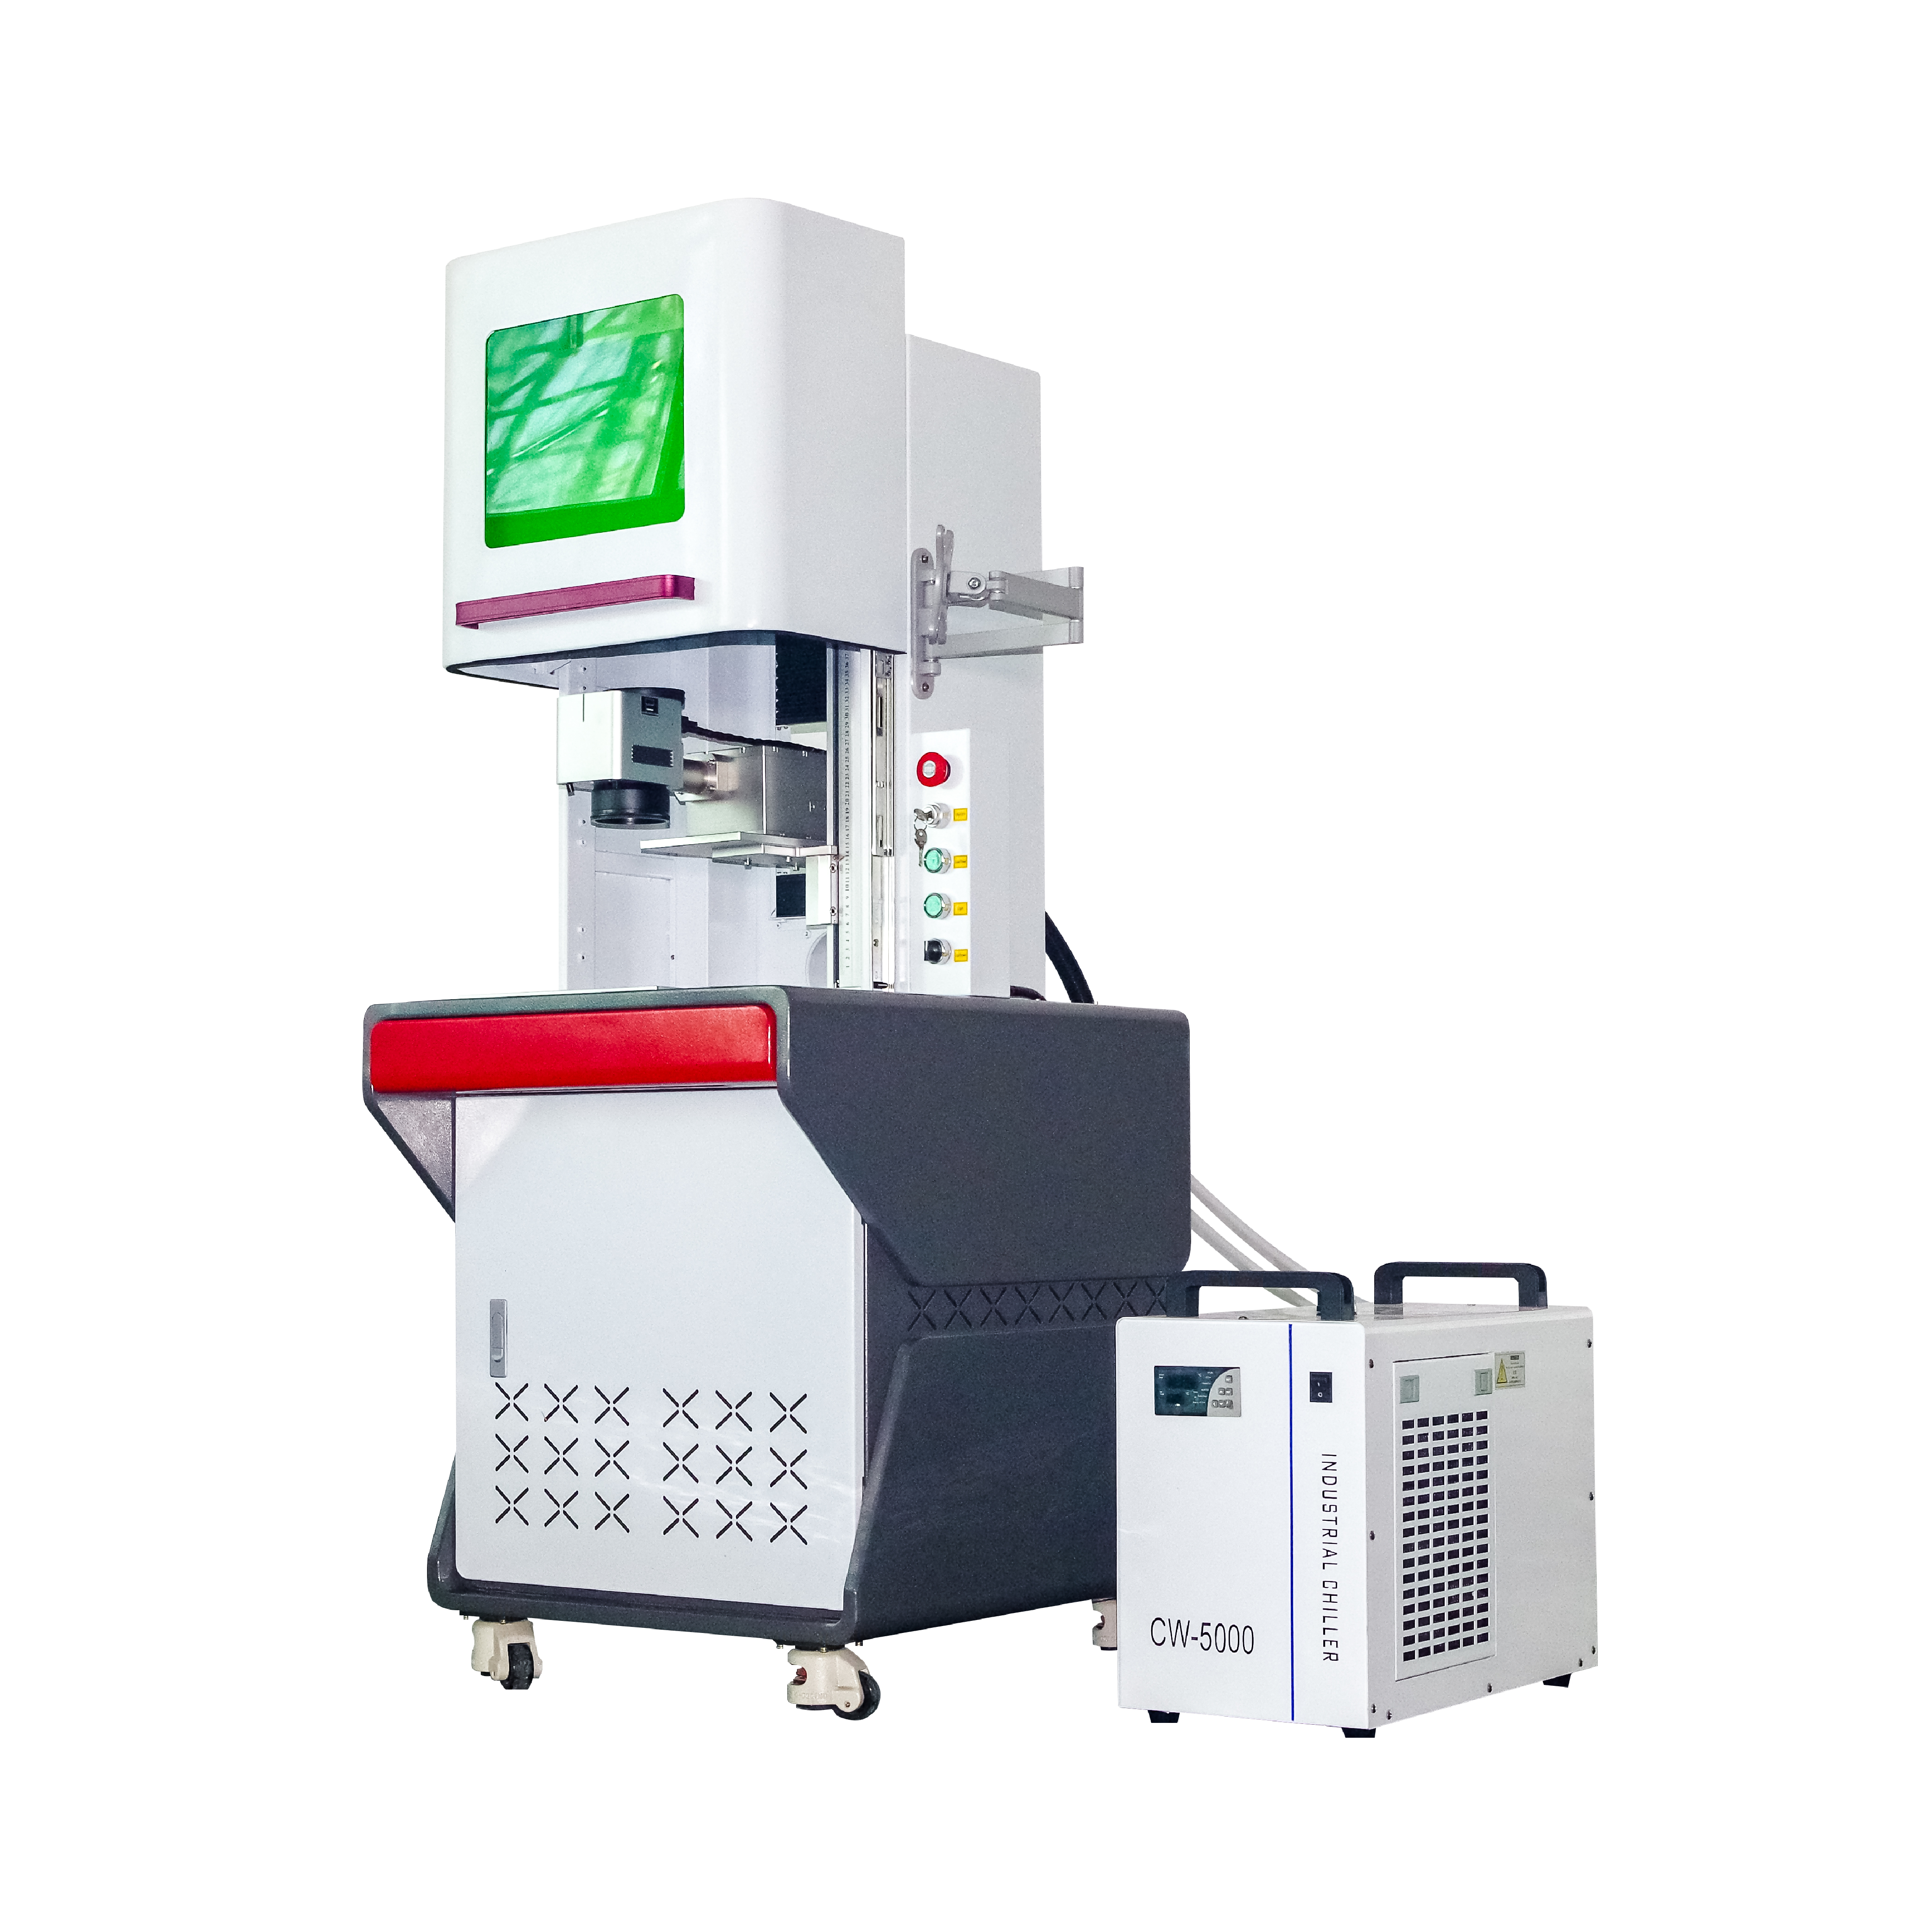 High precision enclosures closed 3w 5w 10w UV laser marking machine for PCB glass plastic metal with emergency stop button